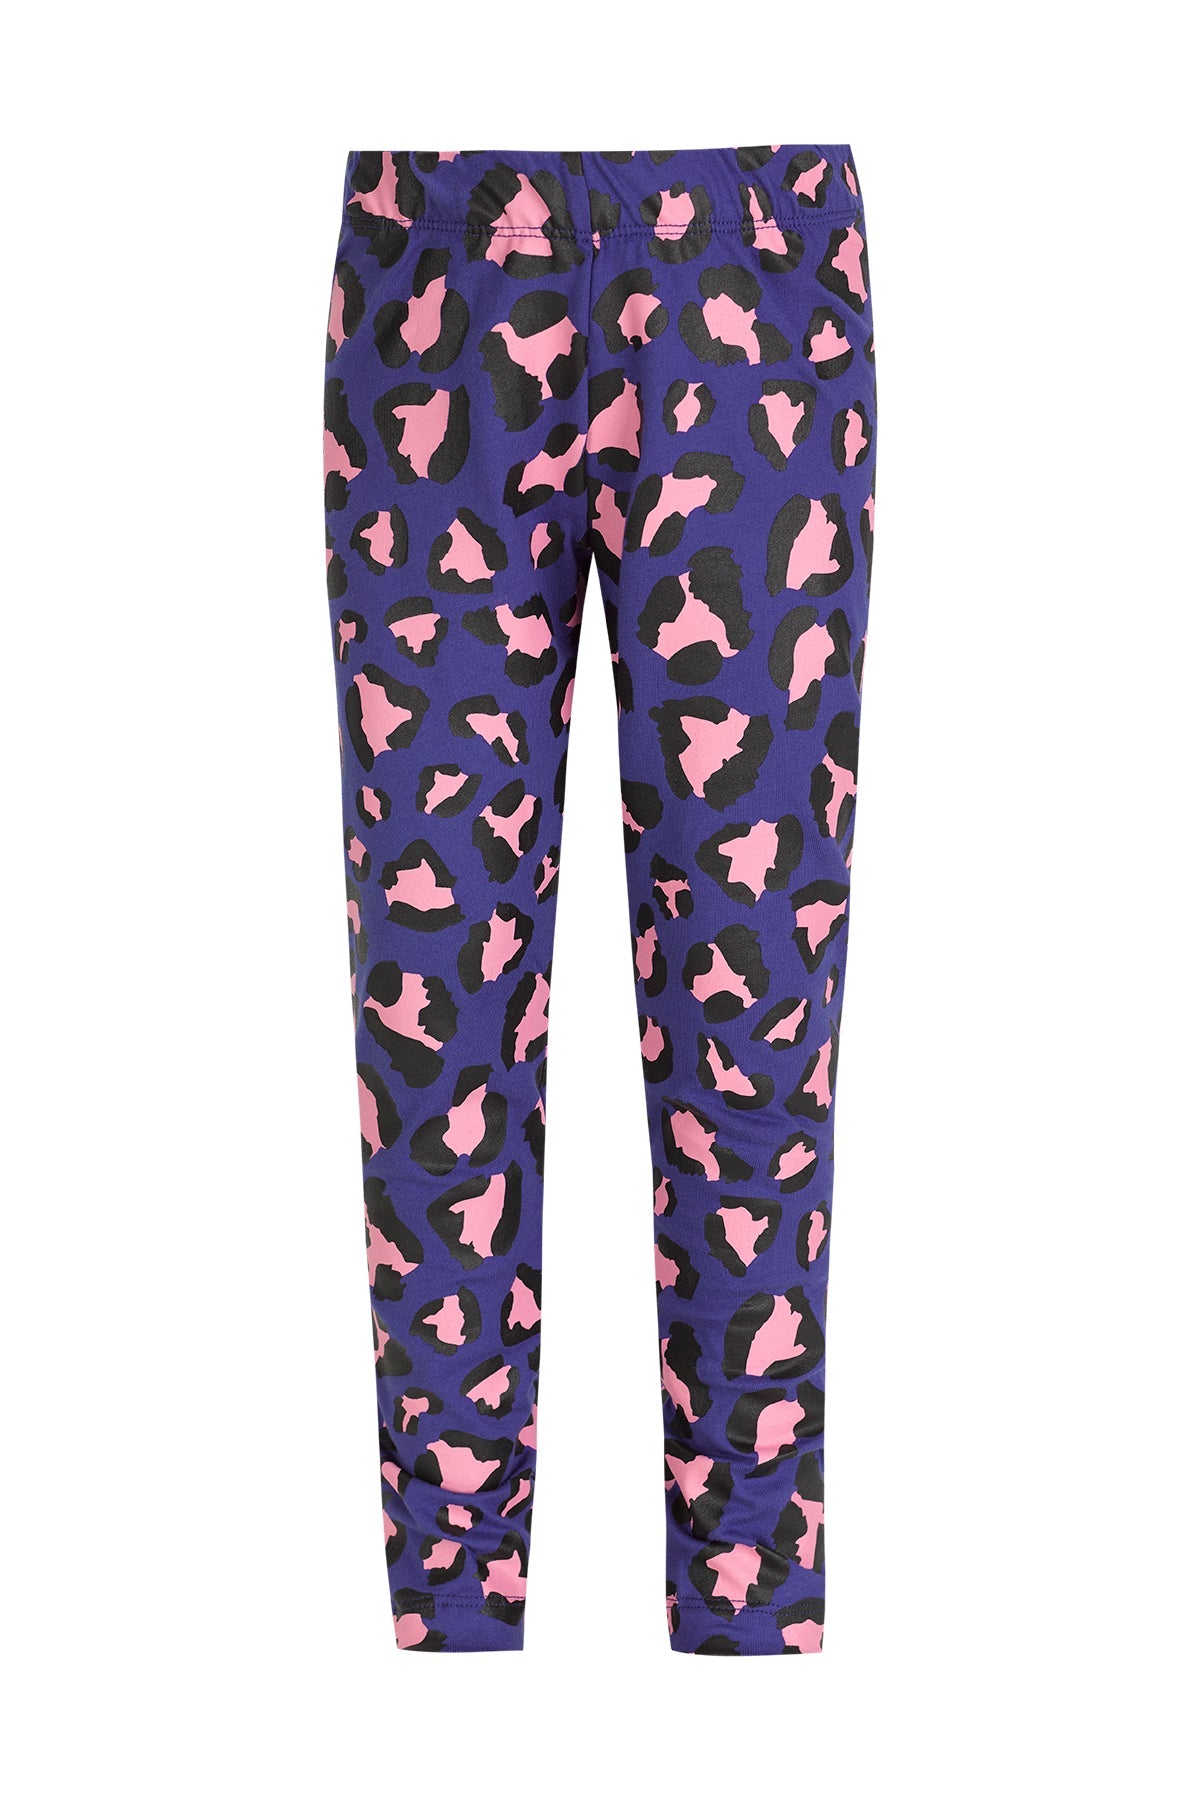 BLUE AND PINK LEOPARD PRINTED LEGGINGS MA KIDS